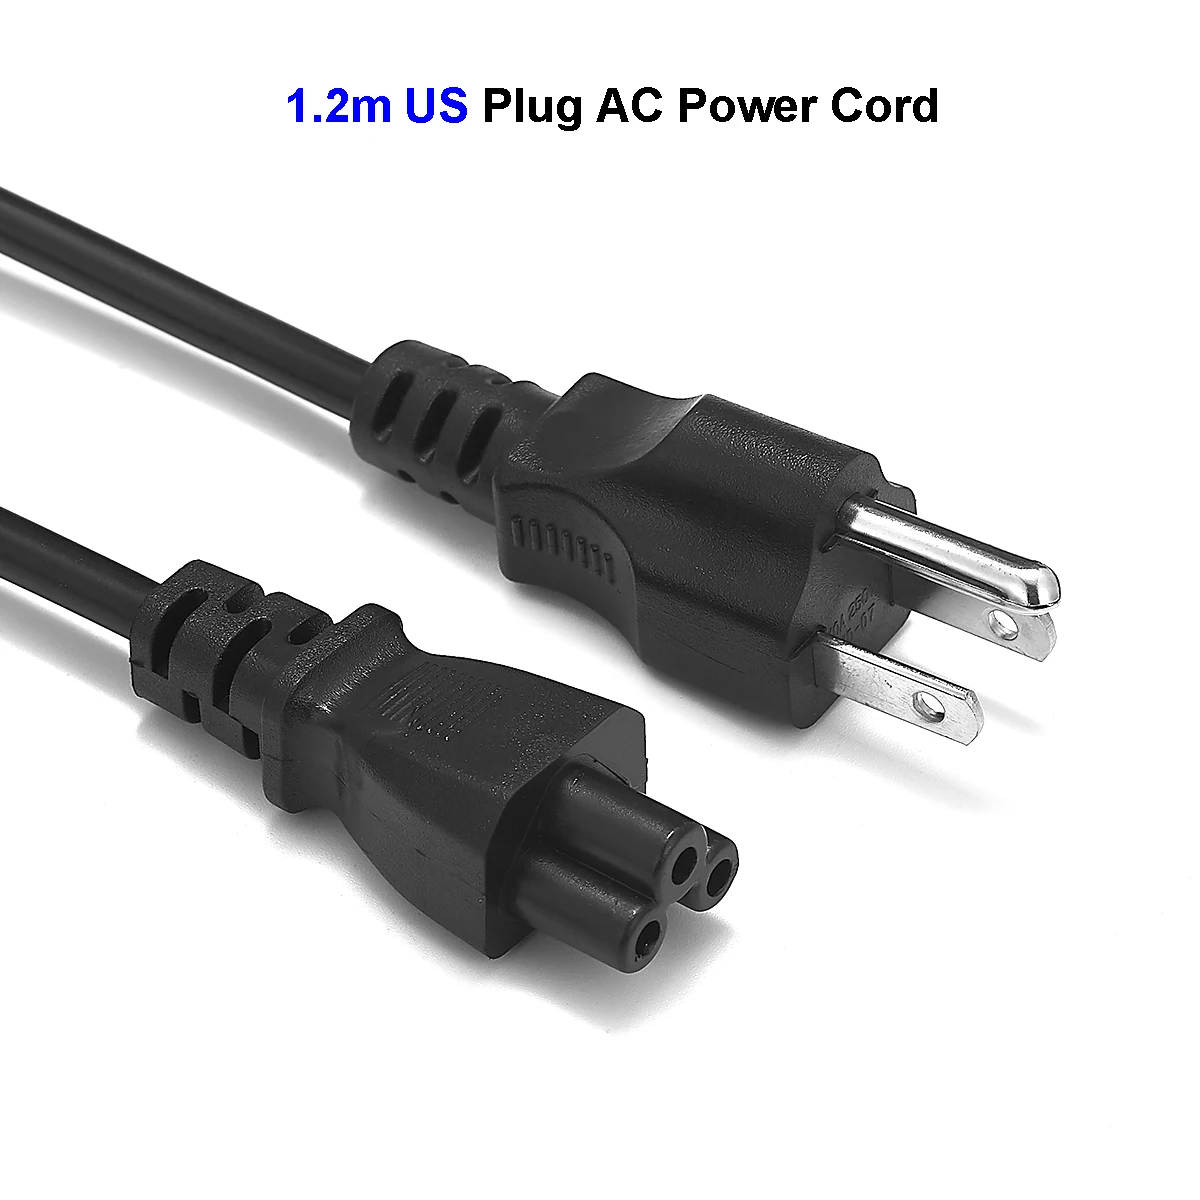 

US Plug Power Cord 3 Pin Prong C5 Cloverleaf American USA Power Cable Cord 1.2m 4ft For AC Adapters Laptop Notebook